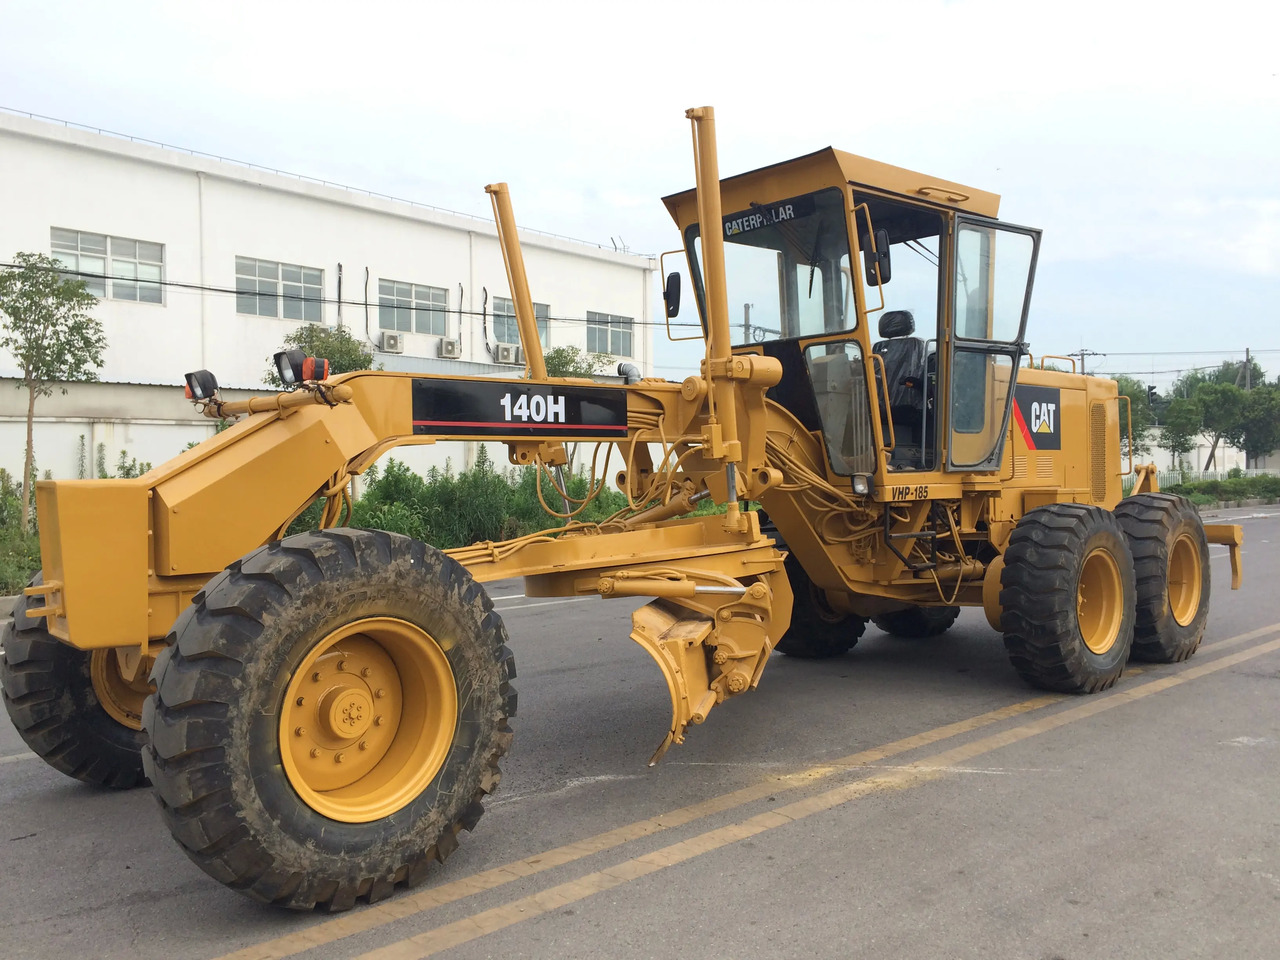 Grejder Hot sale Used Cat 140H motor grader with good condition,USED heavy equipment used motor grader CAT 140H grader in China: slika Grejder Hot sale Used Cat 140H motor grader with good condition,USED heavy equipment used motor grader CAT 140H grader in China